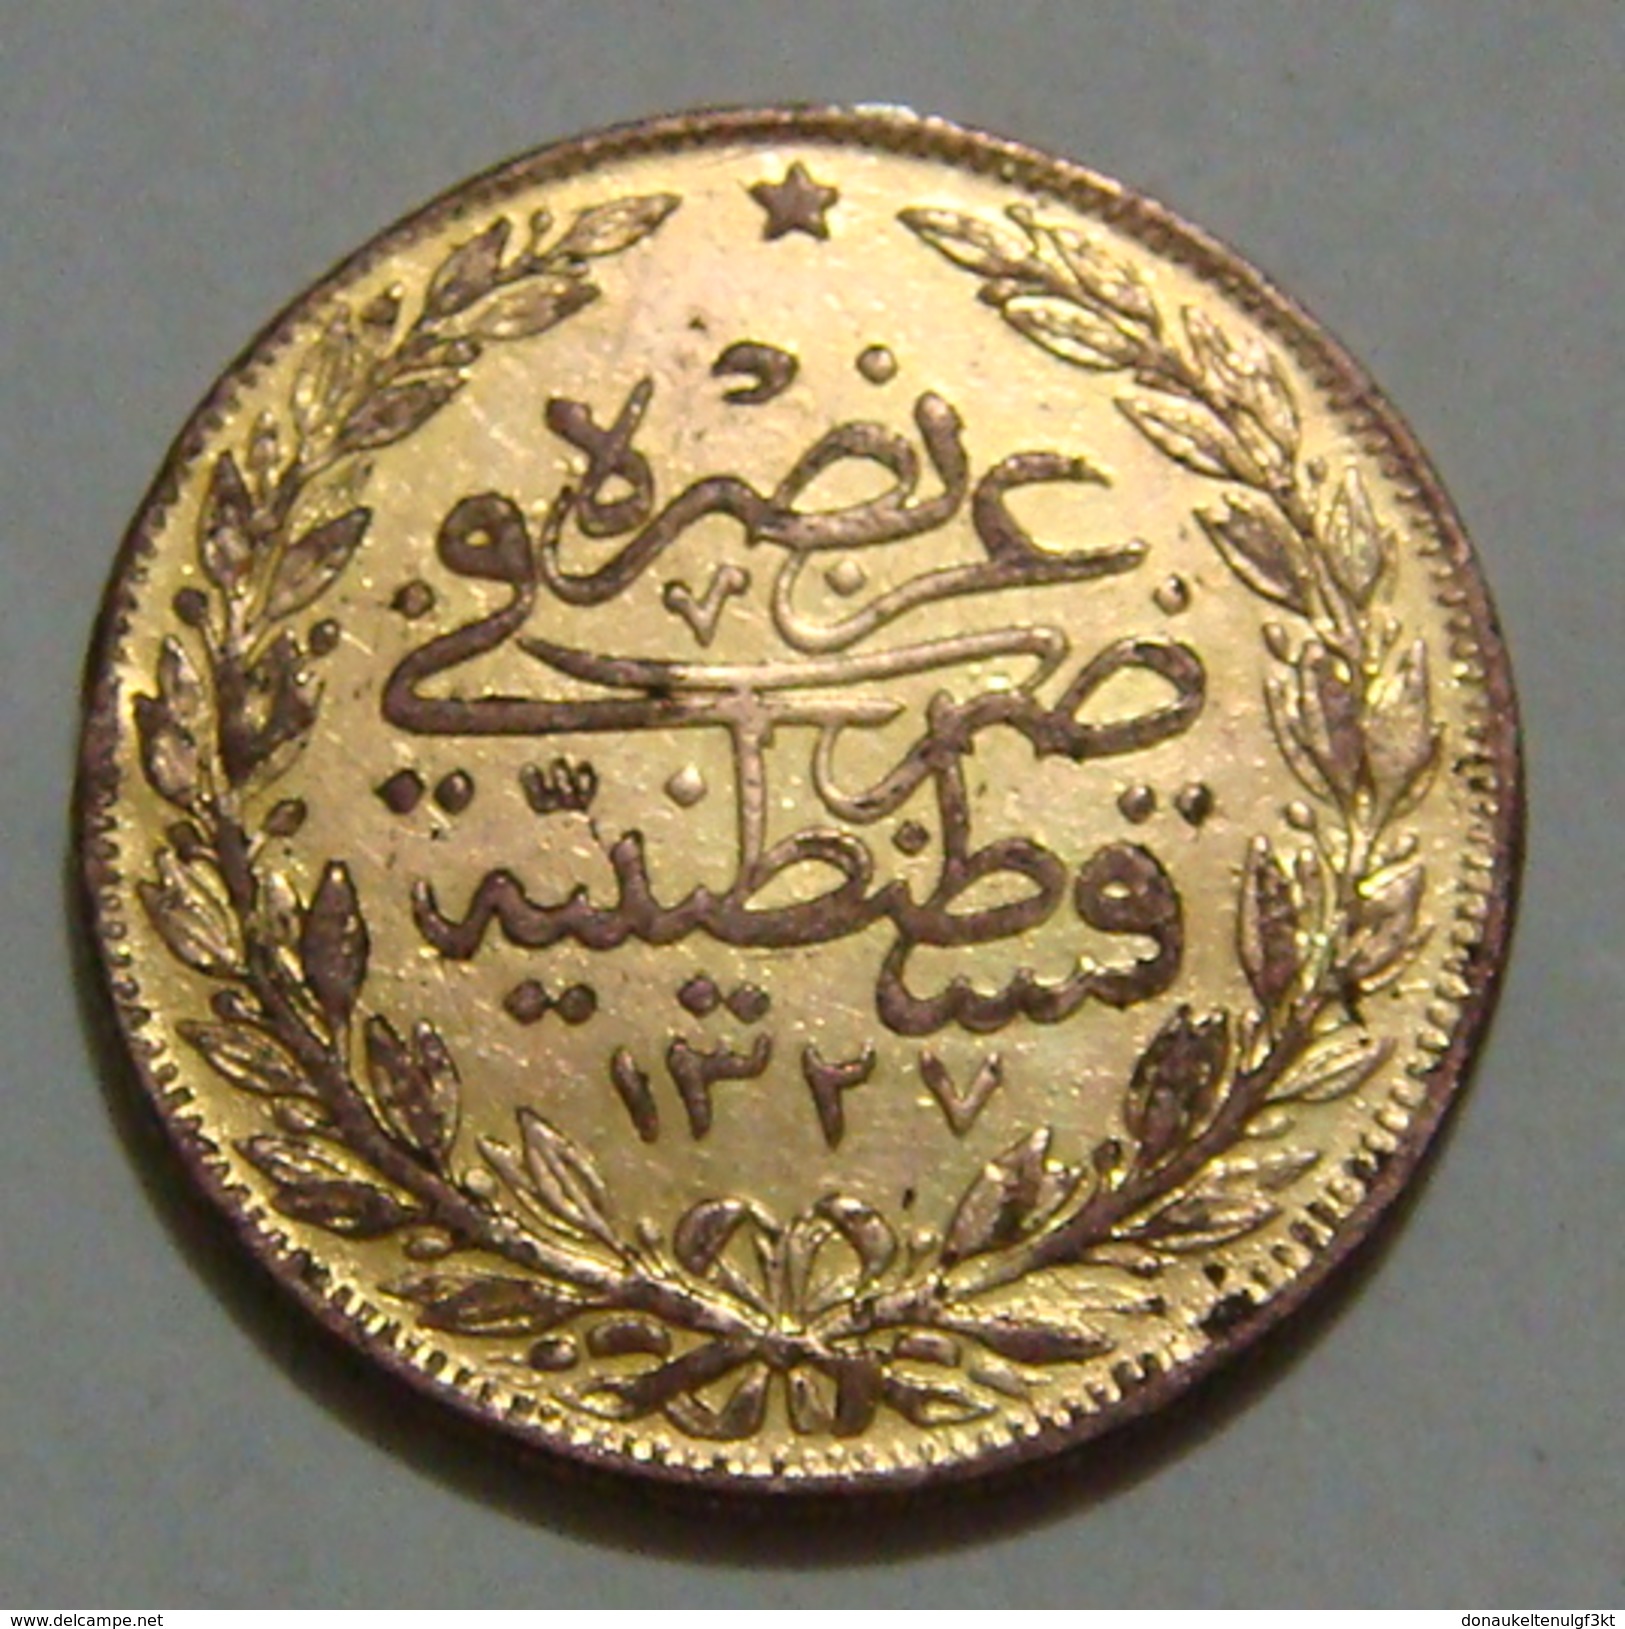 TURKEY OTTOMAN 100 PIASTRES 1327 Year 4, OFFICIAL RESTRIKE OR PROBE, VERY RARE OR UNIQUE, 5.59 Gr. - Turkey